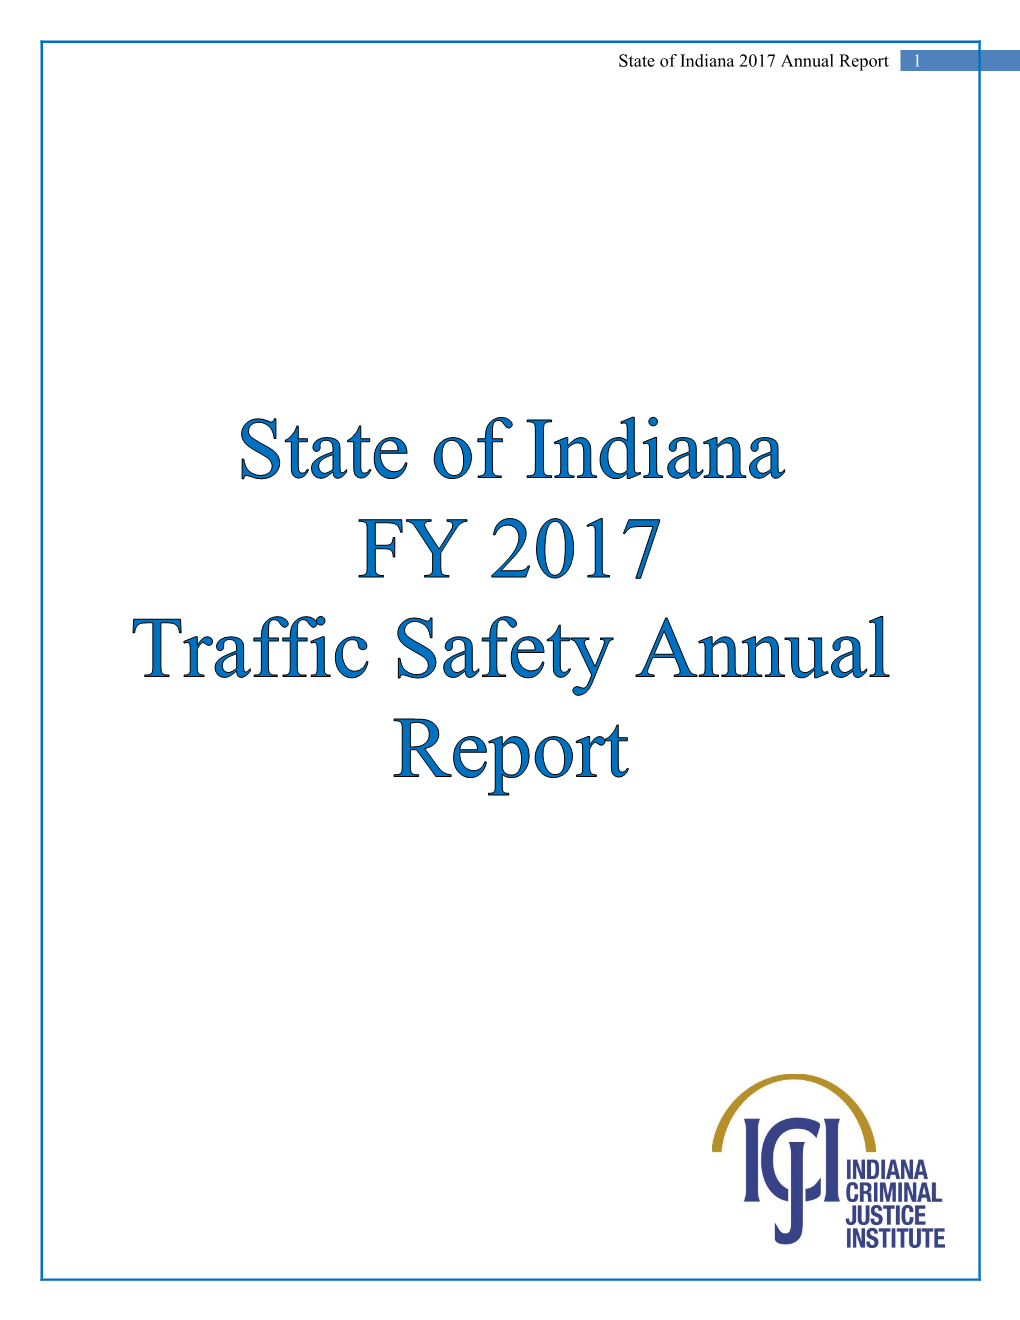 Fiscal Year 2017 Annual Report